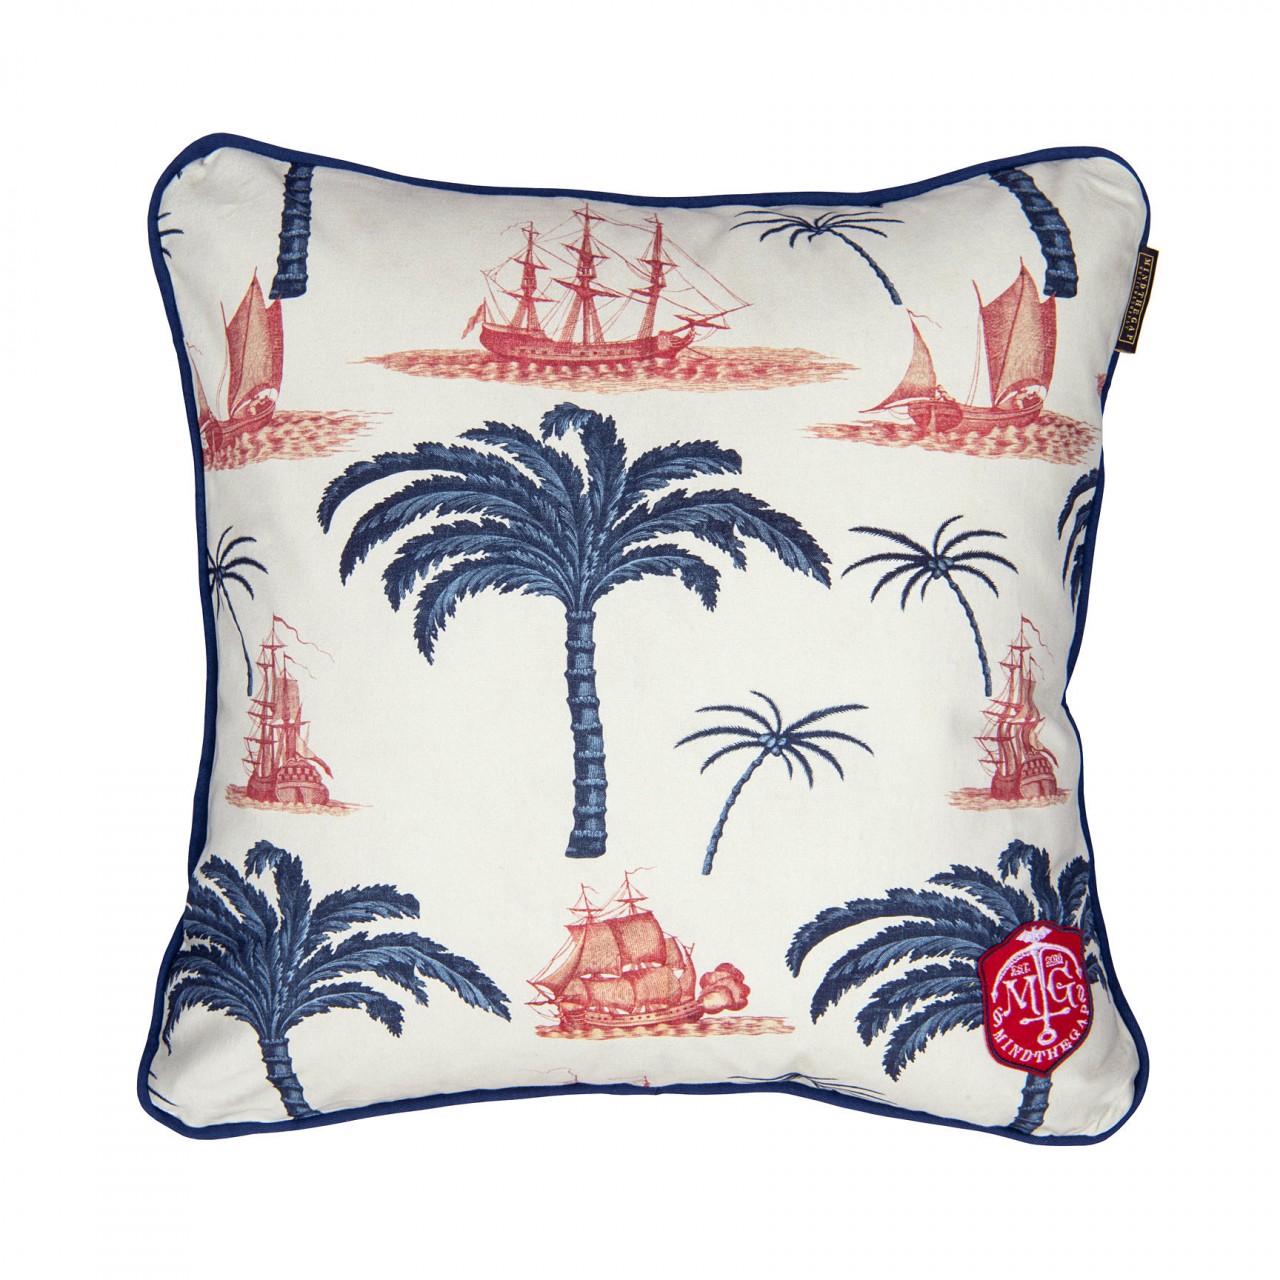 images/productimages/small/aegean-natural-fabric-cushion-front-lc40108.jpg